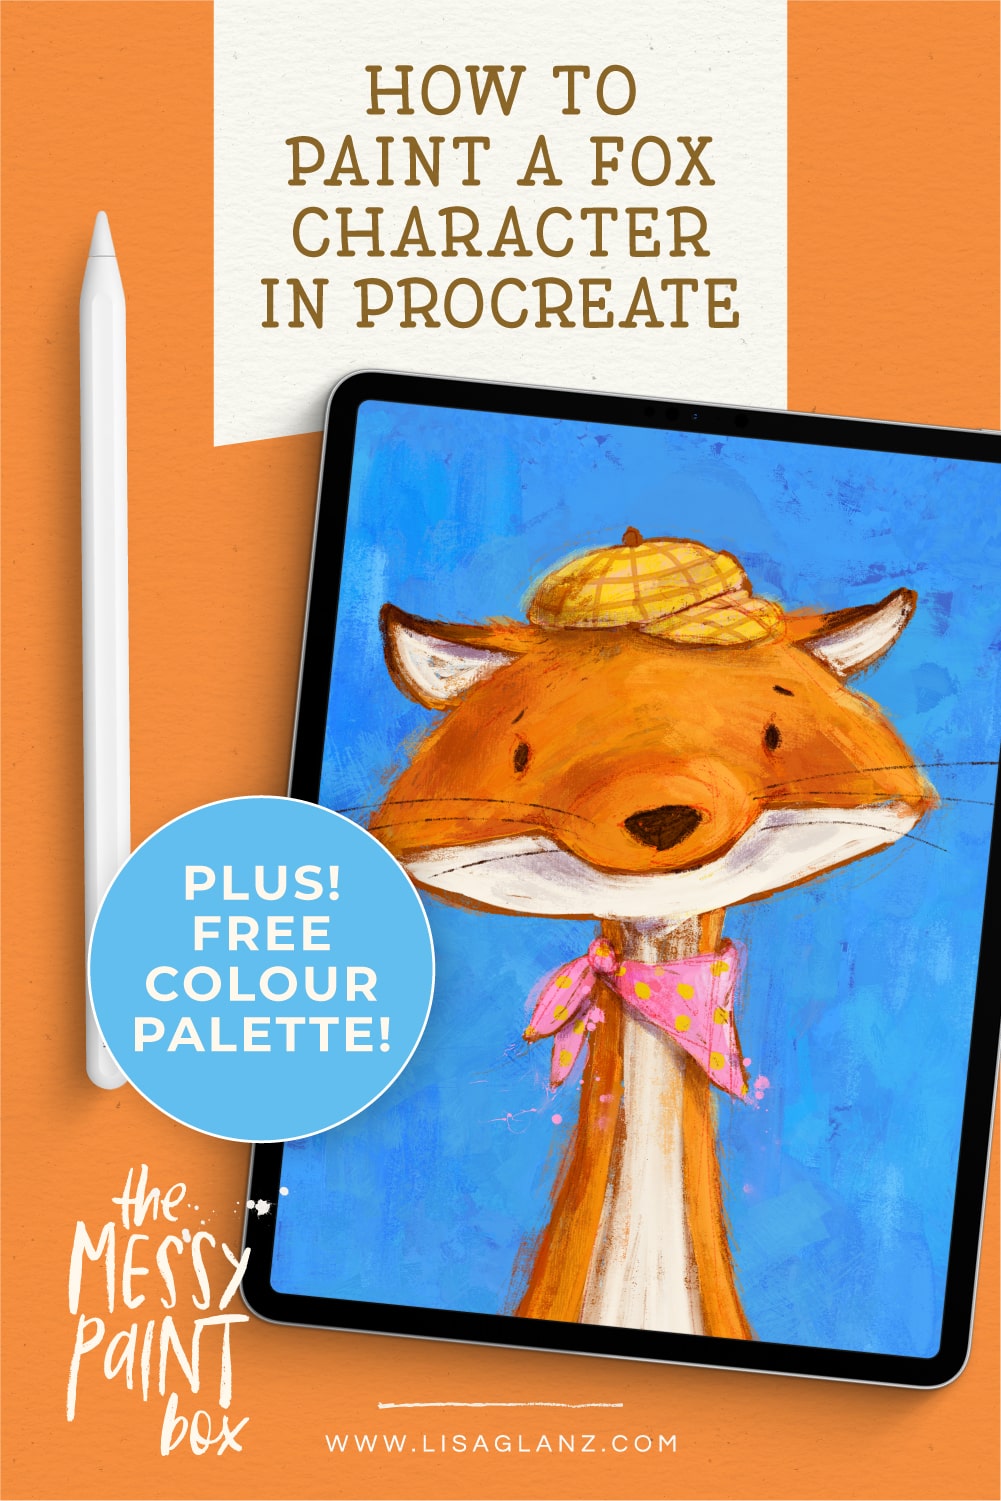 How to paint a cute Fox Character in Procreate